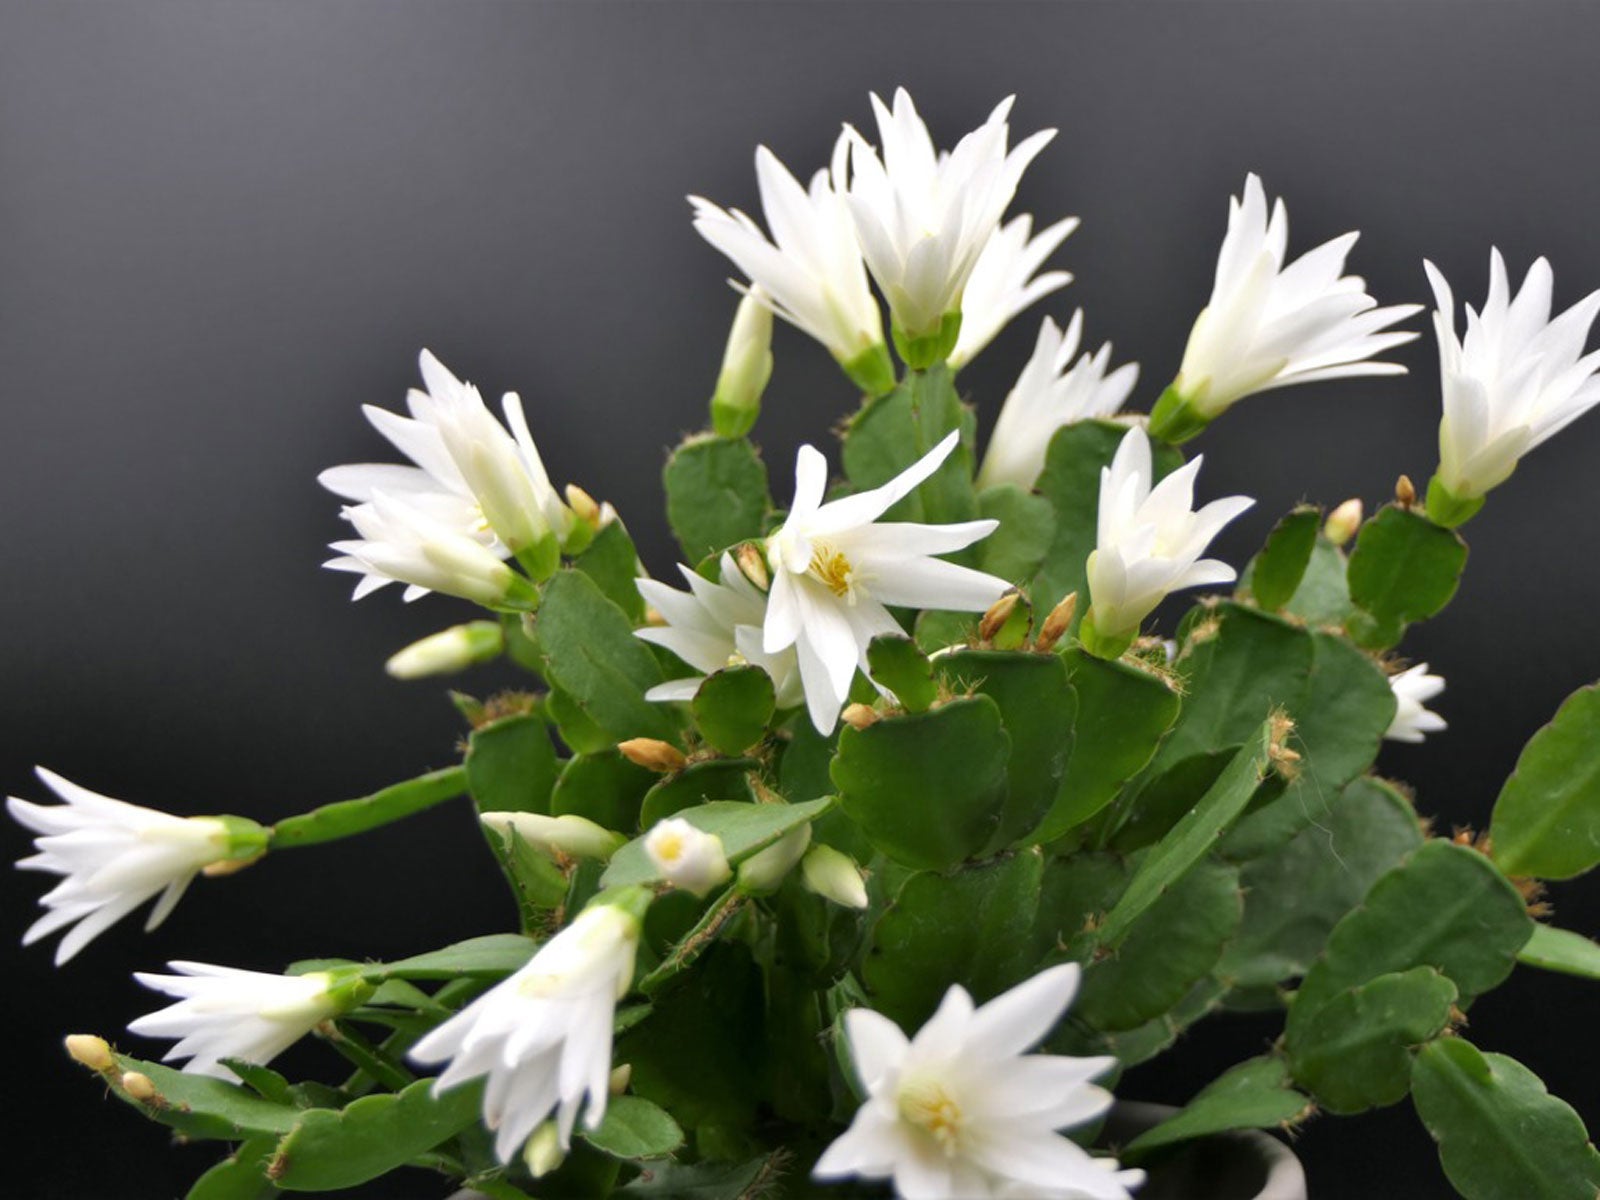 easter cactus care - tips for growing an easter cactus plant